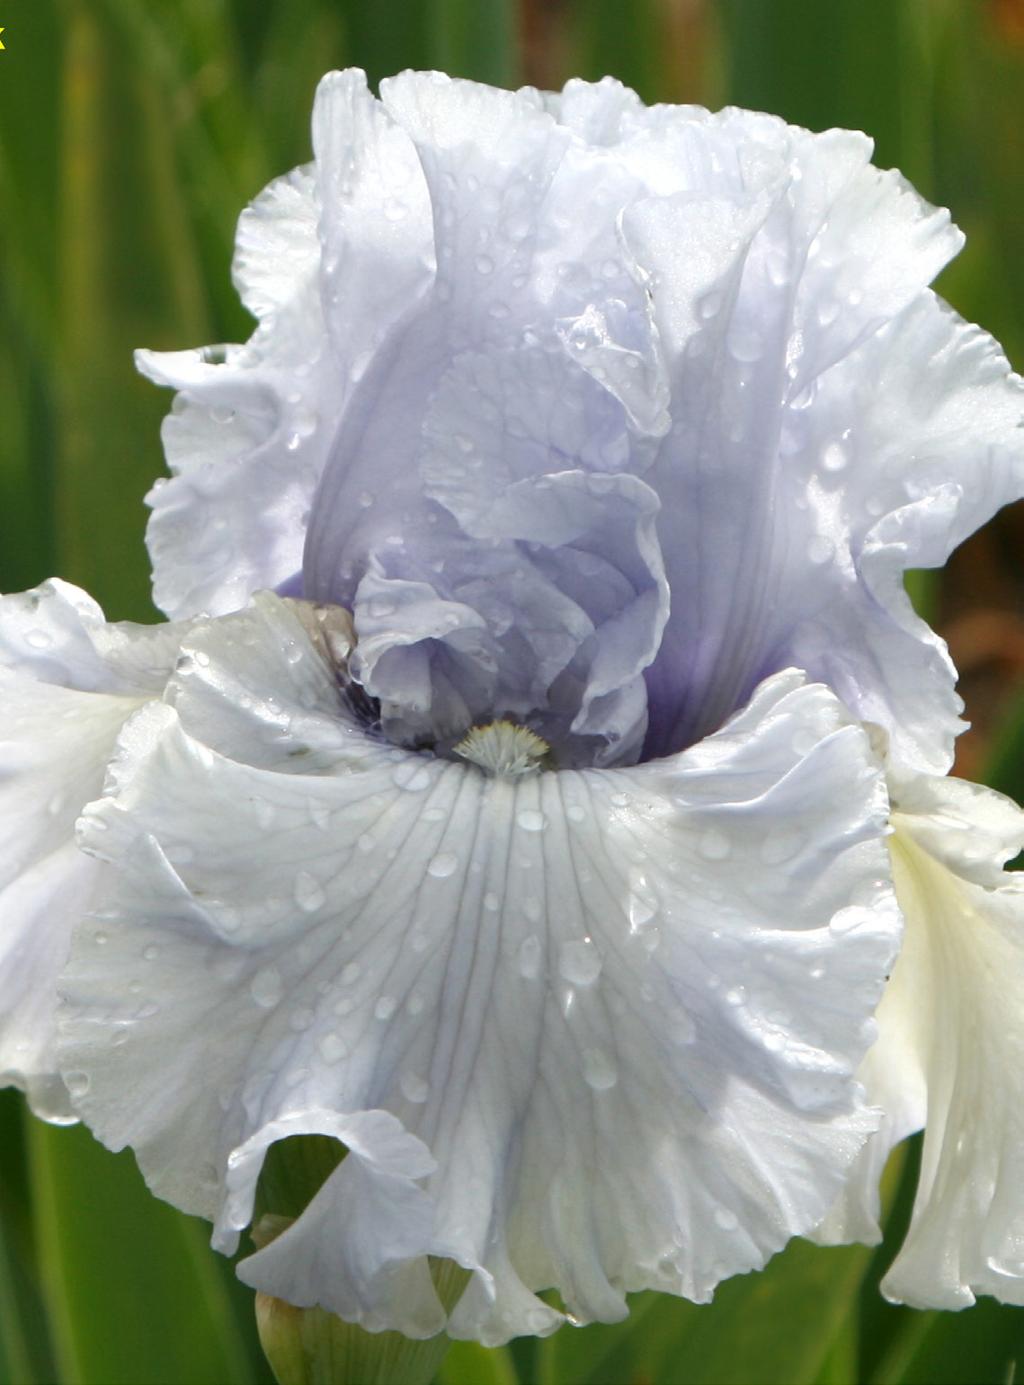 President s Message I hope you ll be able to come to our meeting this Friday, which will feature guest speaker Mark Greene, who will give an informative presentation on the American Iris Society